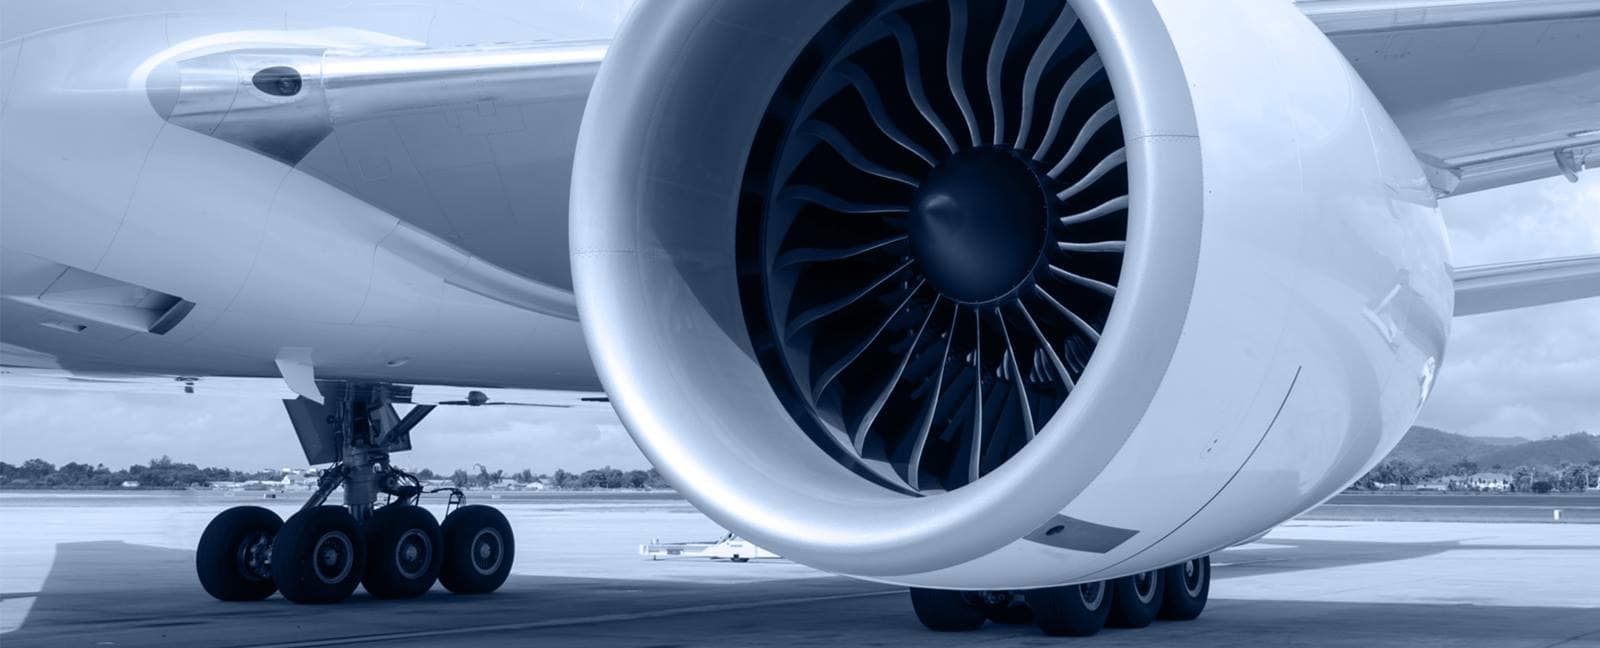 Close-up of of commercial airplane jet engine.